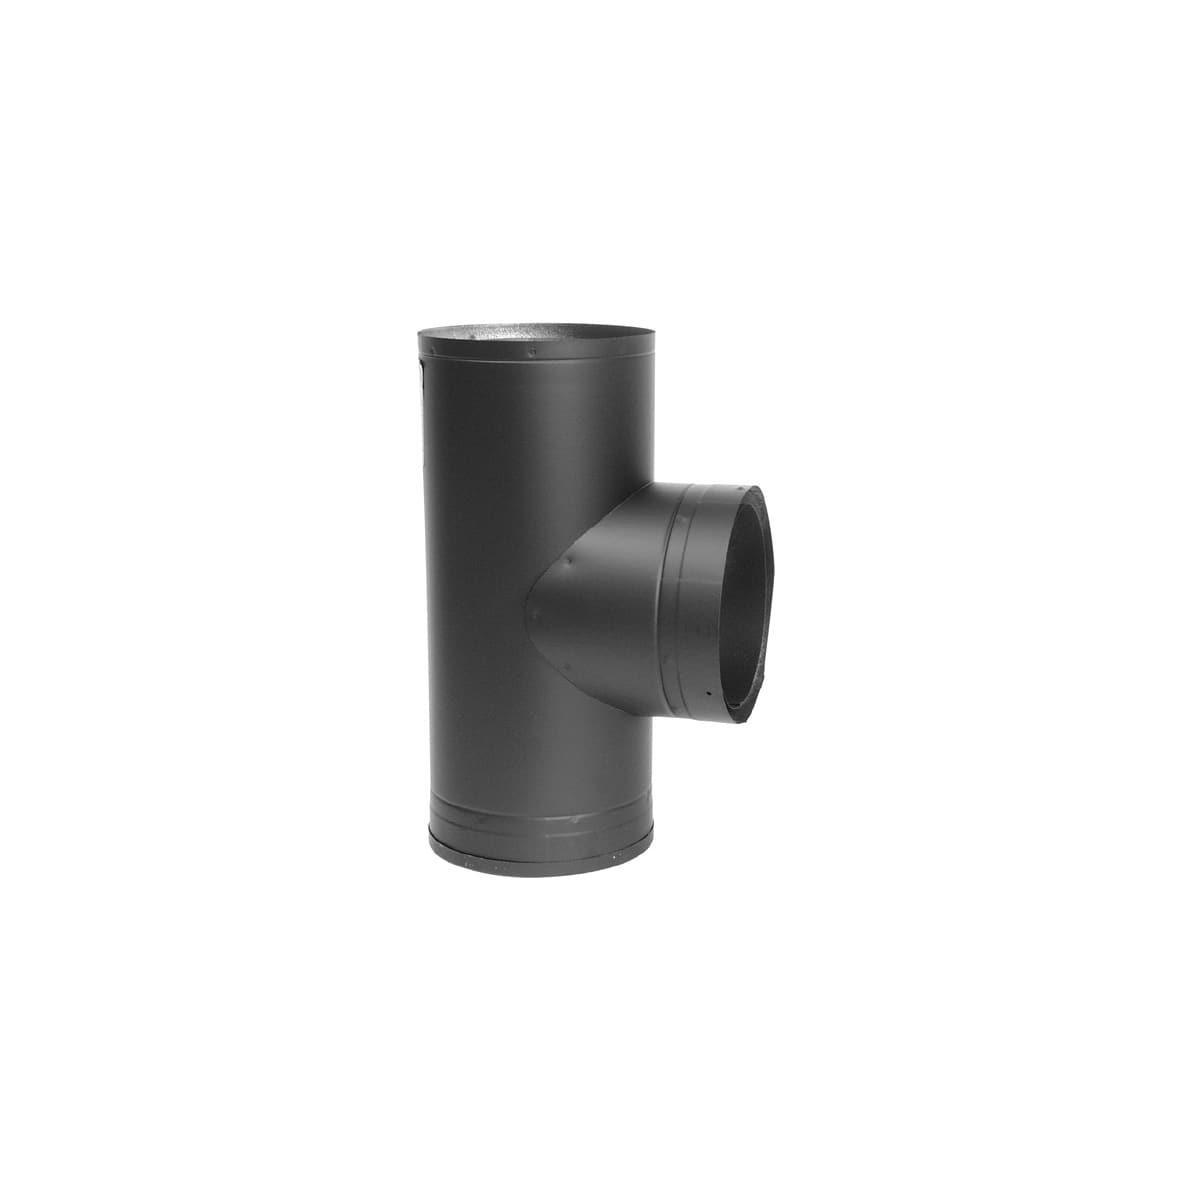 Metalbest 6DCC-K 6 Inner Diameter - DCC Stove Pipe - Double Wall - Connector Kit Black Vent Pipe Stove Pipe Connector